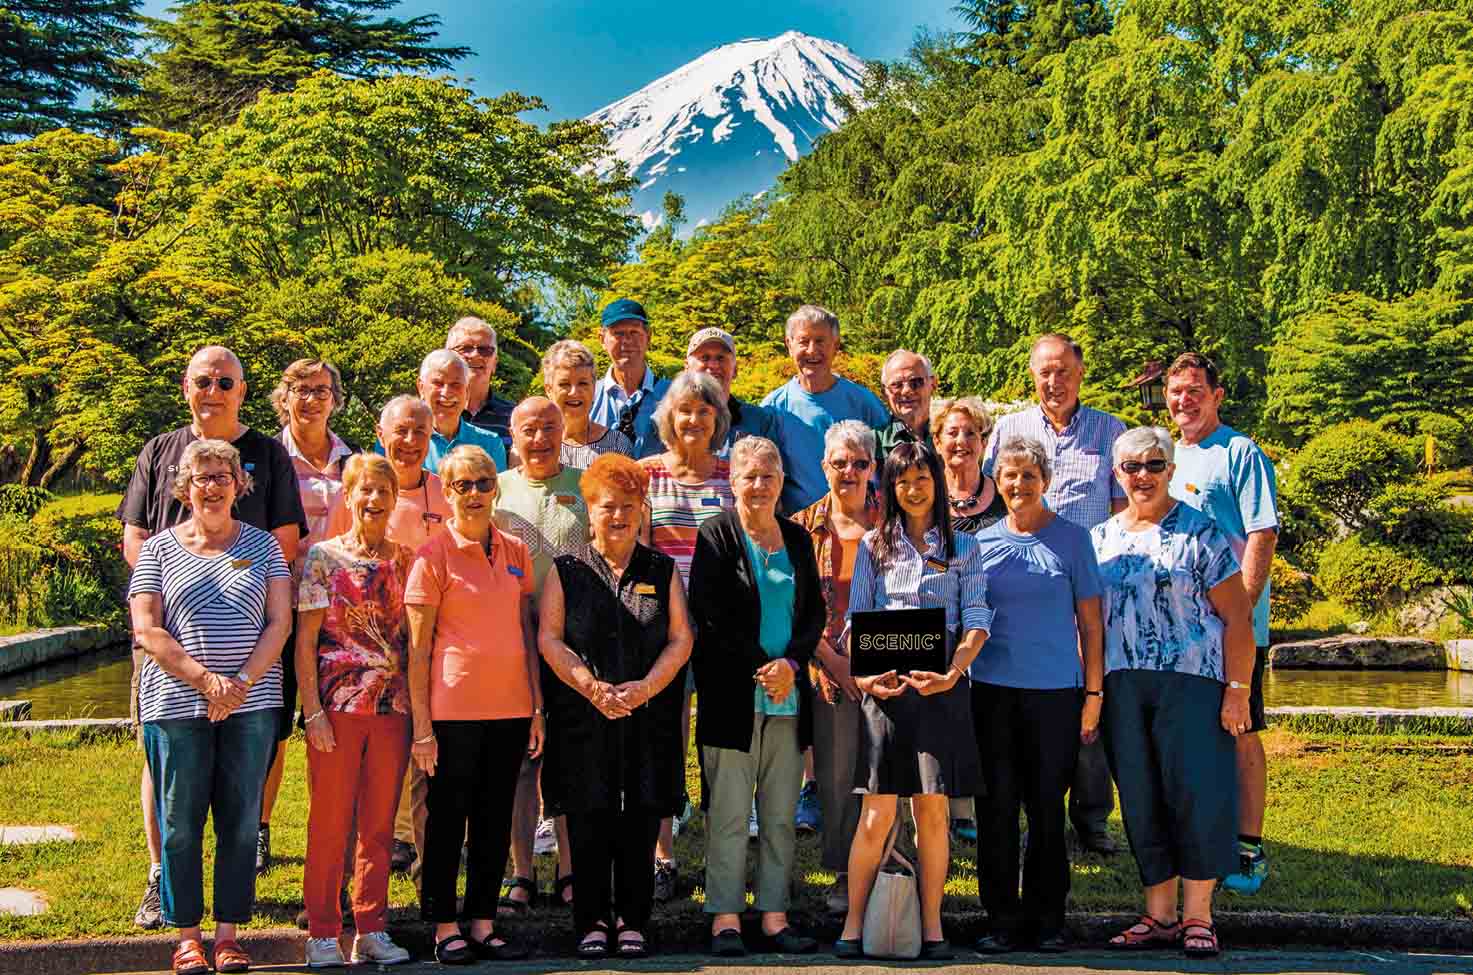 Group of travellers posing for a photo with Mount Fuji peeking through the ridgeline of the trees in the background